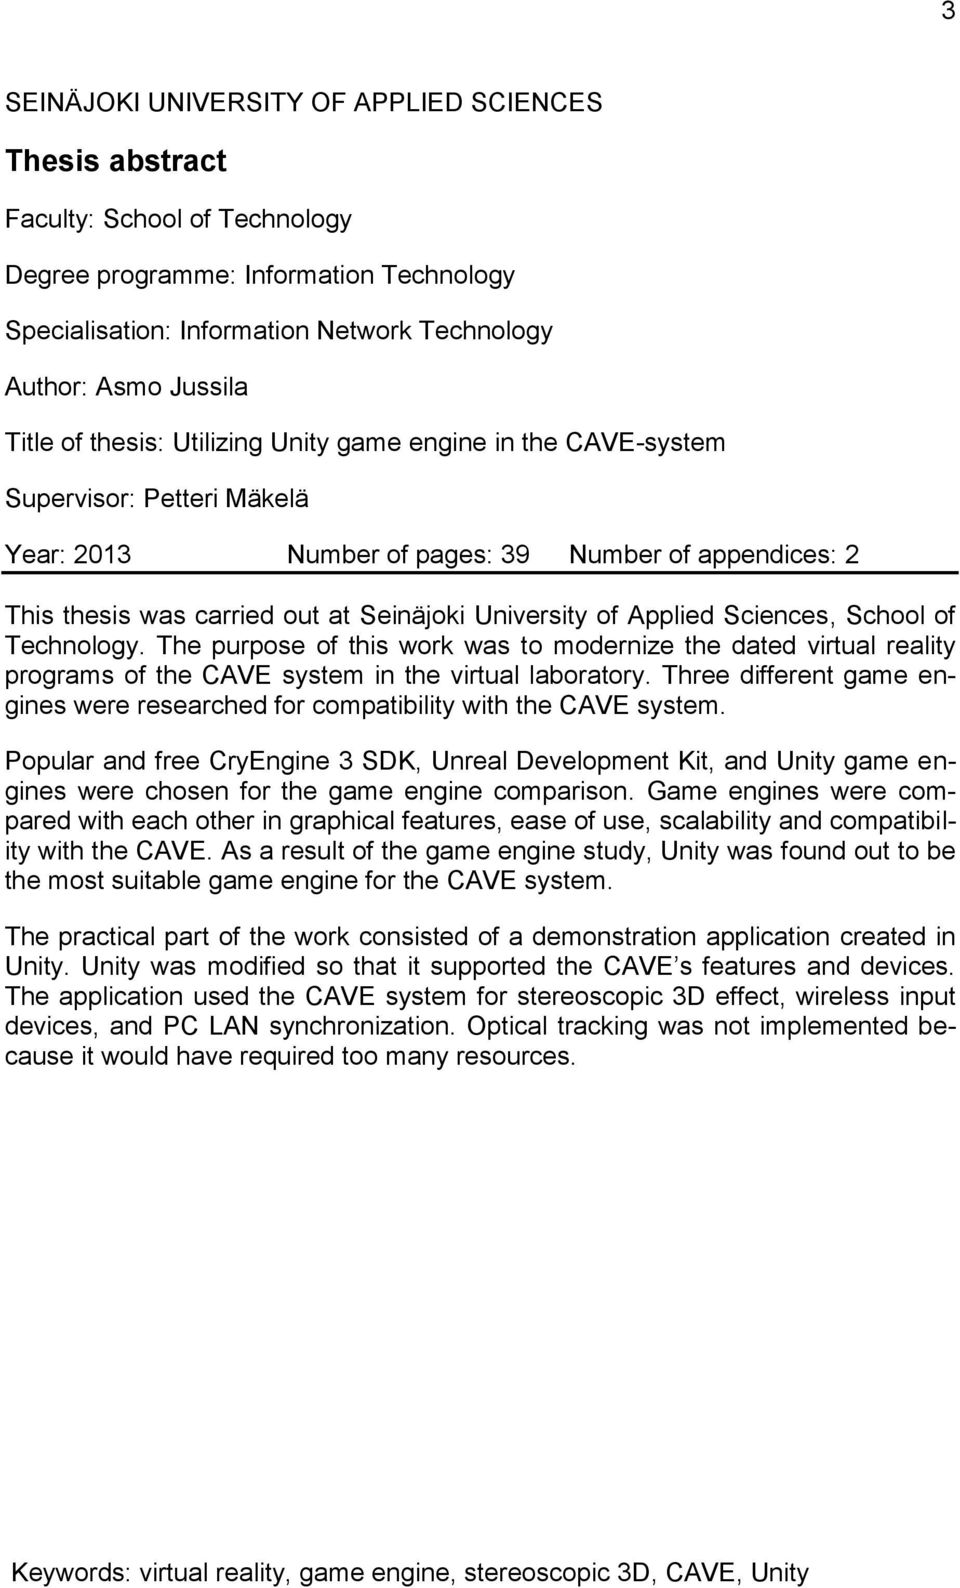 of Applied Sciences, School of Technology. The purpose of this work was to modernize the dated virtual reality programs of the CAVE system in the virtual laboratory.